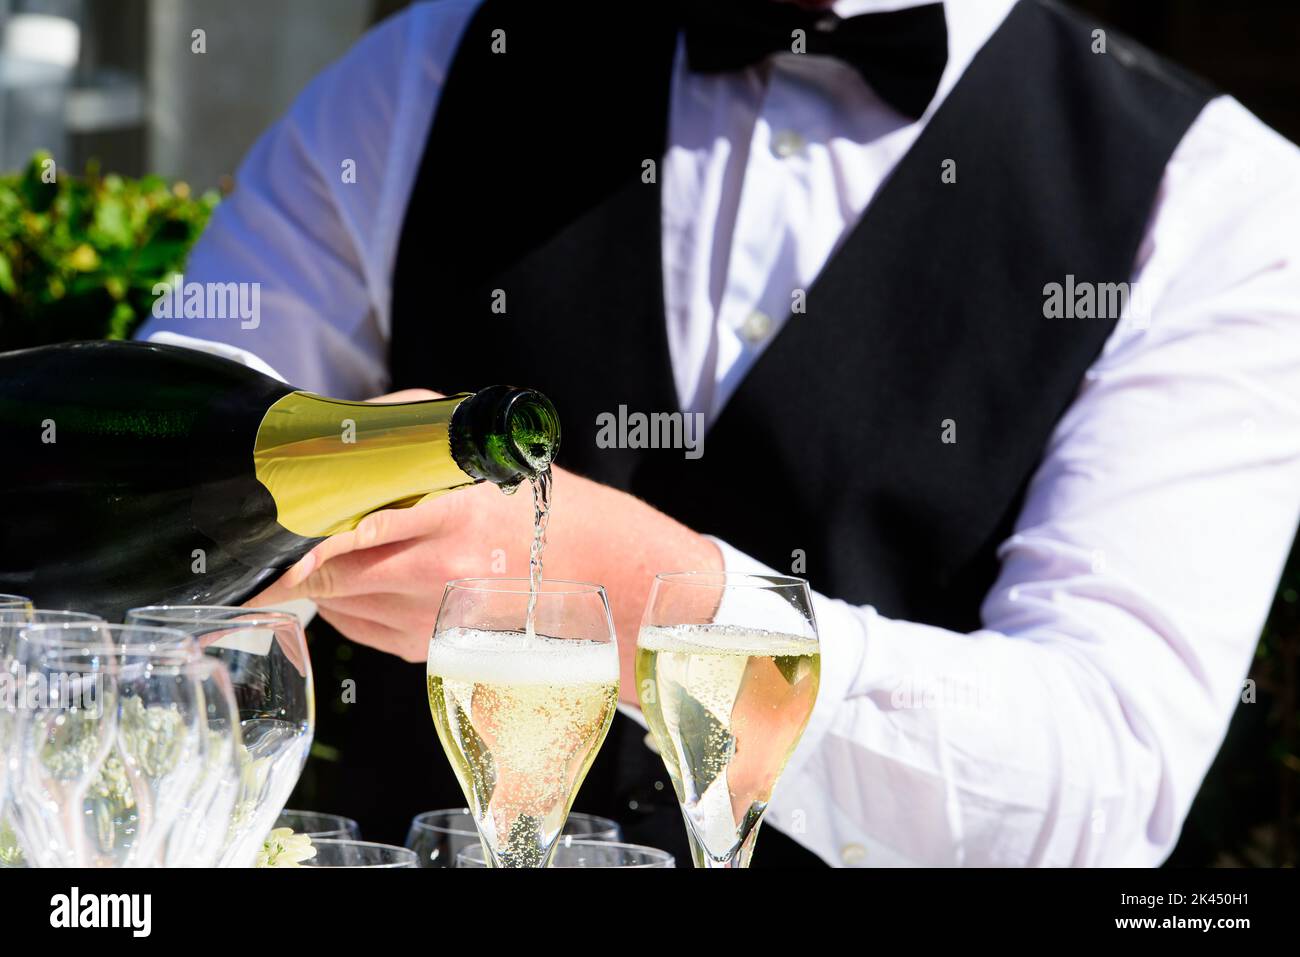 closeup of a champagne bottle pooring champagne into a champagne flute against a blurred waiter at a party Stock Photo